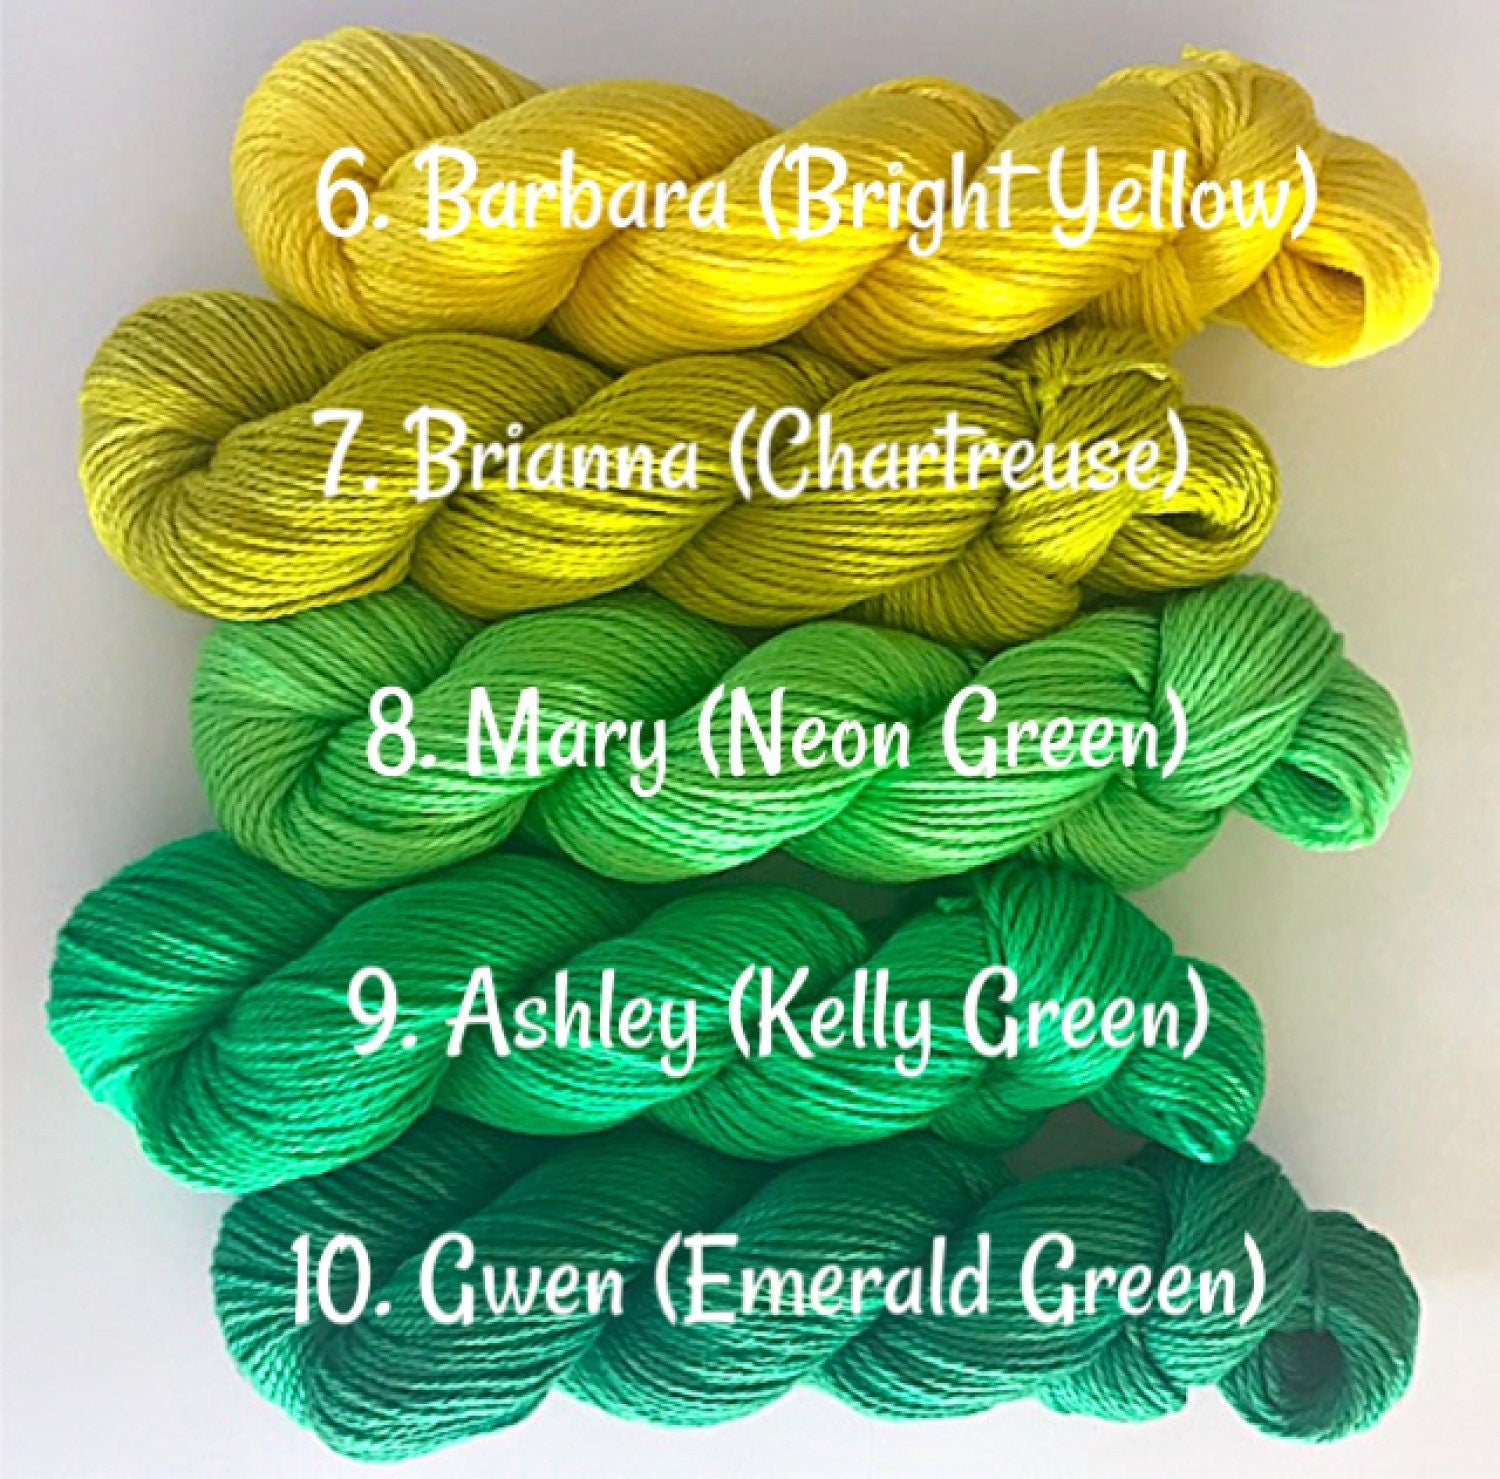 Vegan Yarn Hanks - Hand Dyed - DK / Light Worsted - Choose Your Color and Skein Size - Semi Solids and Tonals - Bamboo Cotton 3 Ply Sport